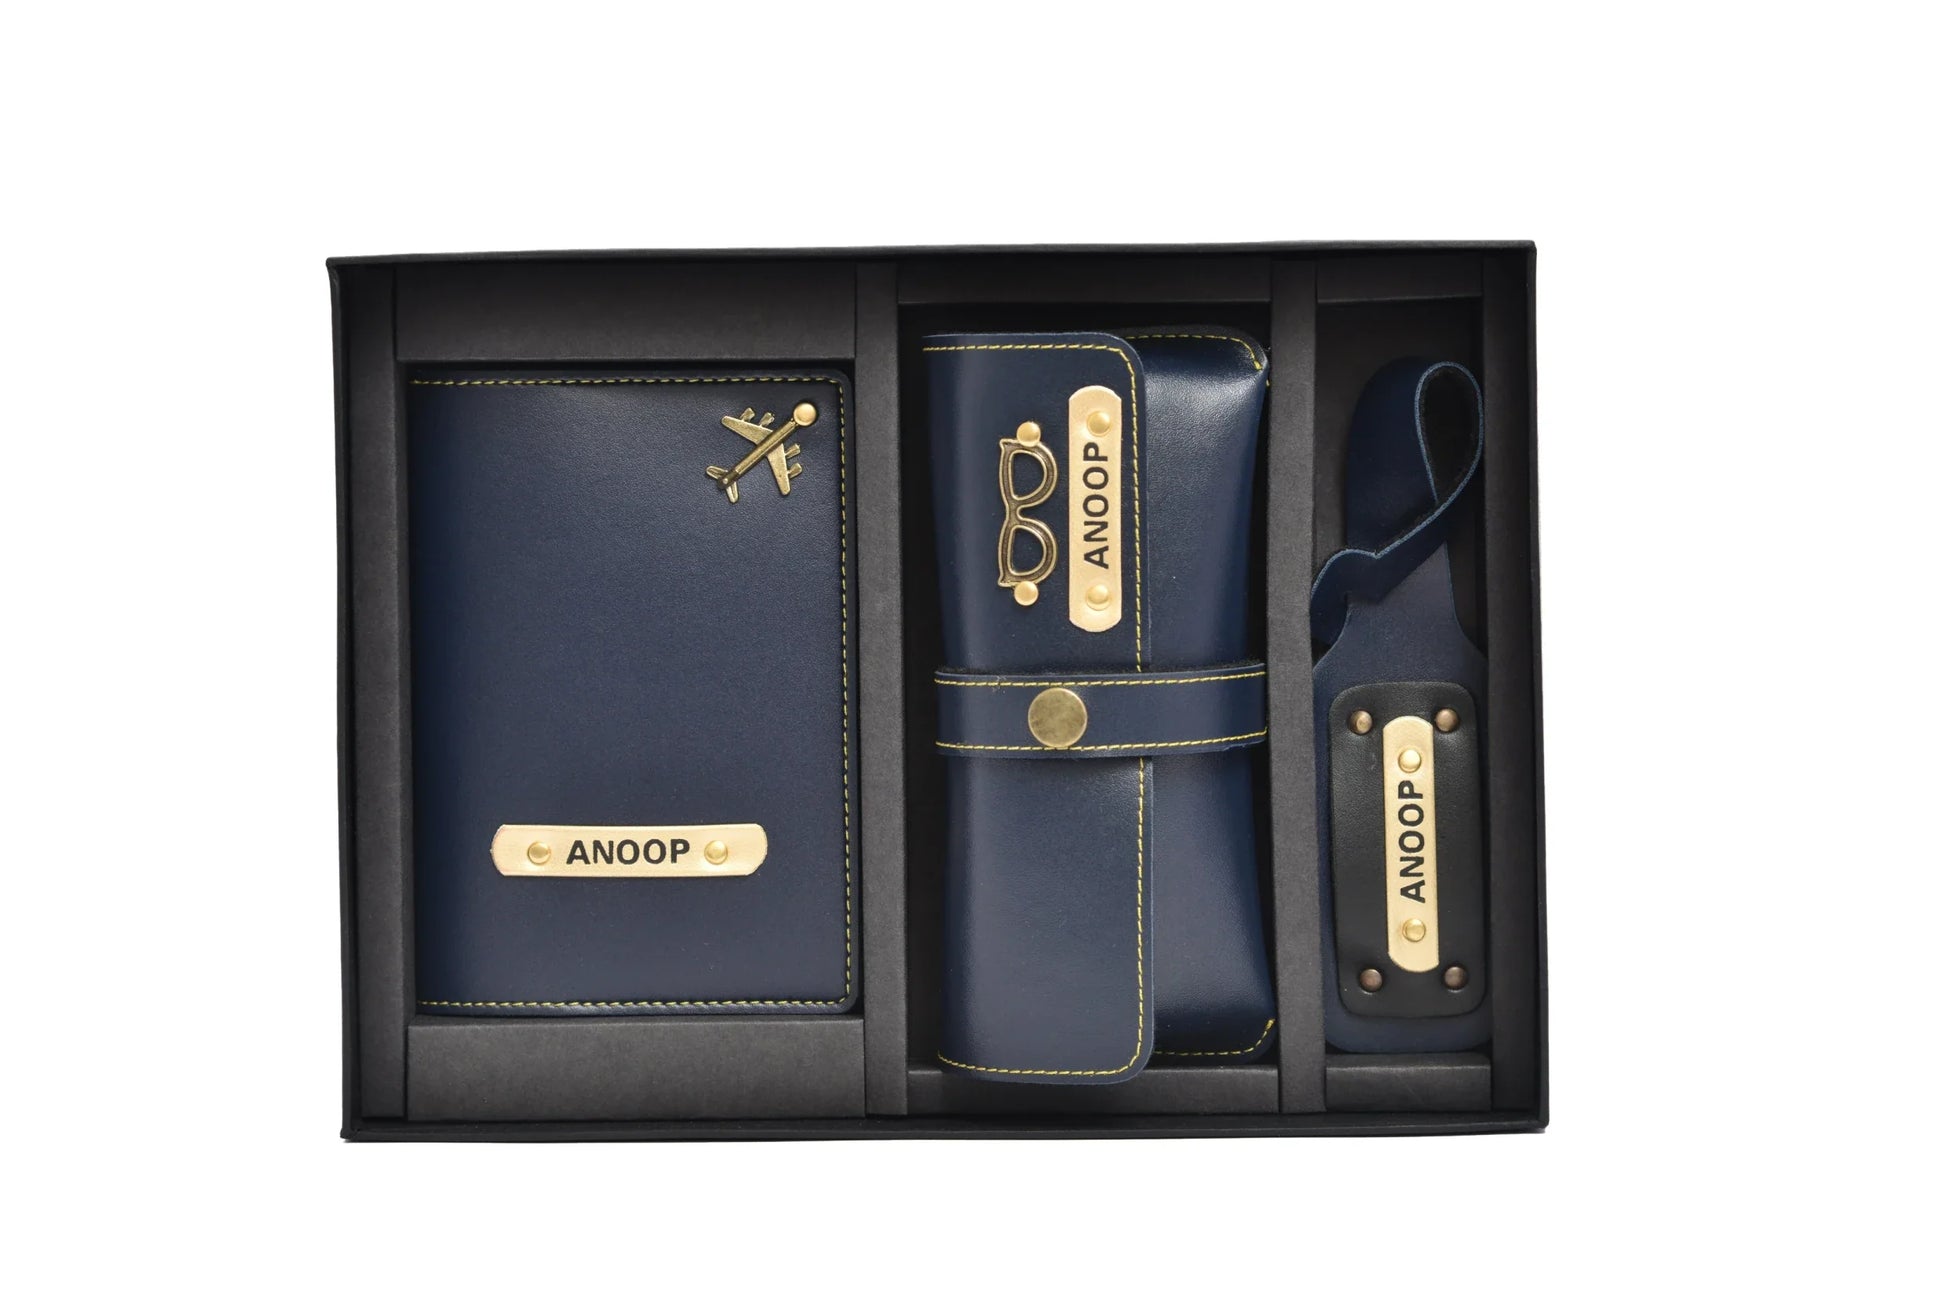 personalized-cb03-royal-blue-customized-best-gift-for-boyfriend-girlfriend.This frequent travellers' combo combo consists of a personalized faux leather Passport & Card Holder, a customized passport cover, a customized Eyewear case, and a customized luggage tag proving its value for money!Personalized Frequent Traveller Combo (3 pcs) - Royal Blue